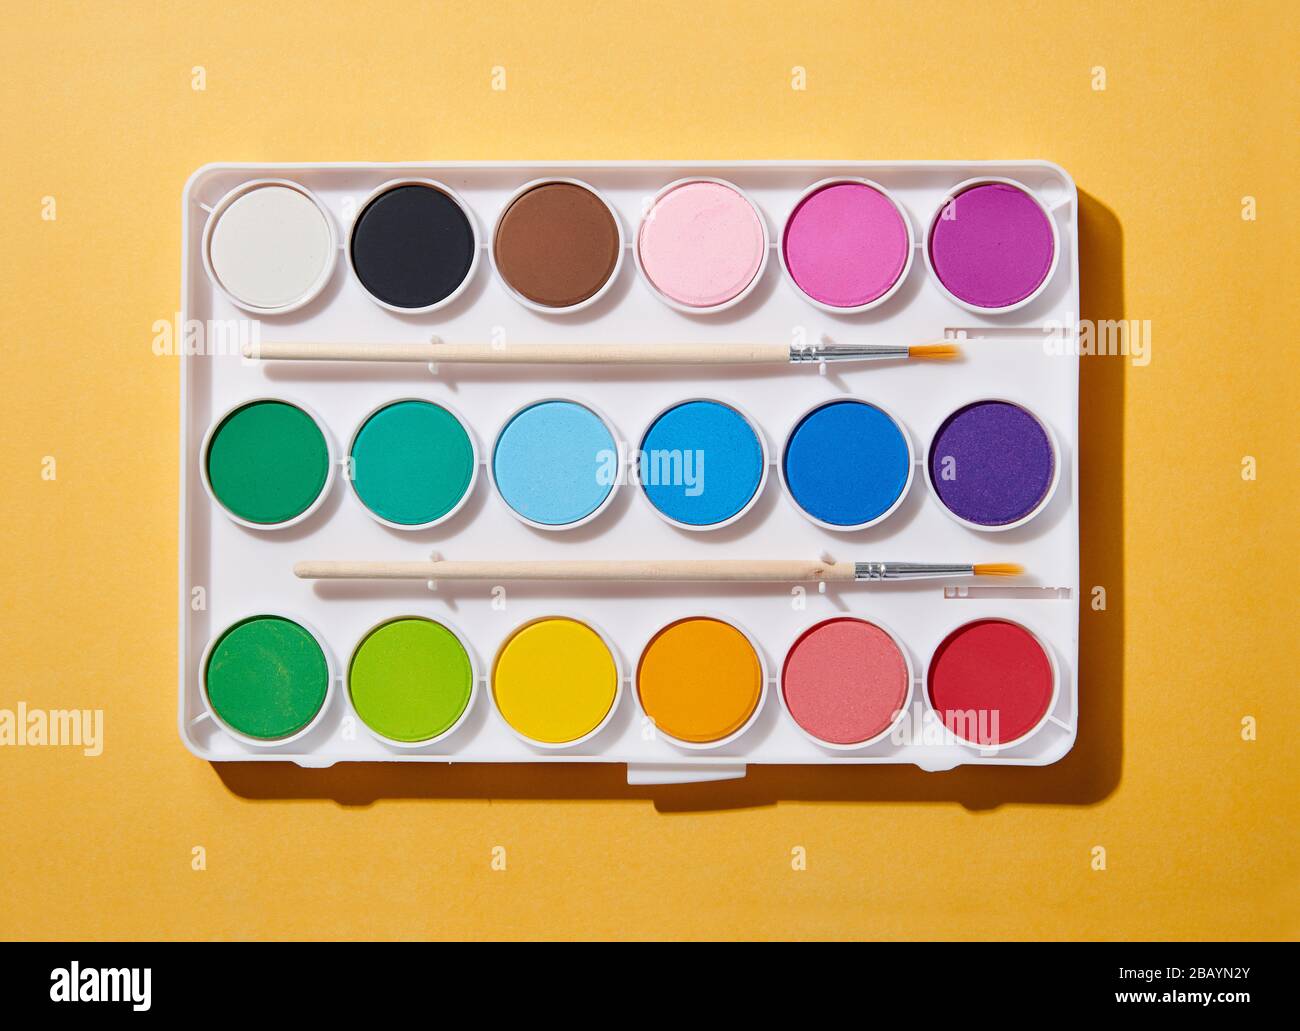 https://c8.alamy.com/comp/2BAYN2Y/open-new-watercolor-paint-box-with-two-brushes-and-rainbow-colored-paints-viewed-from-above-on-an-orange-background-2BAYN2Y.jpg